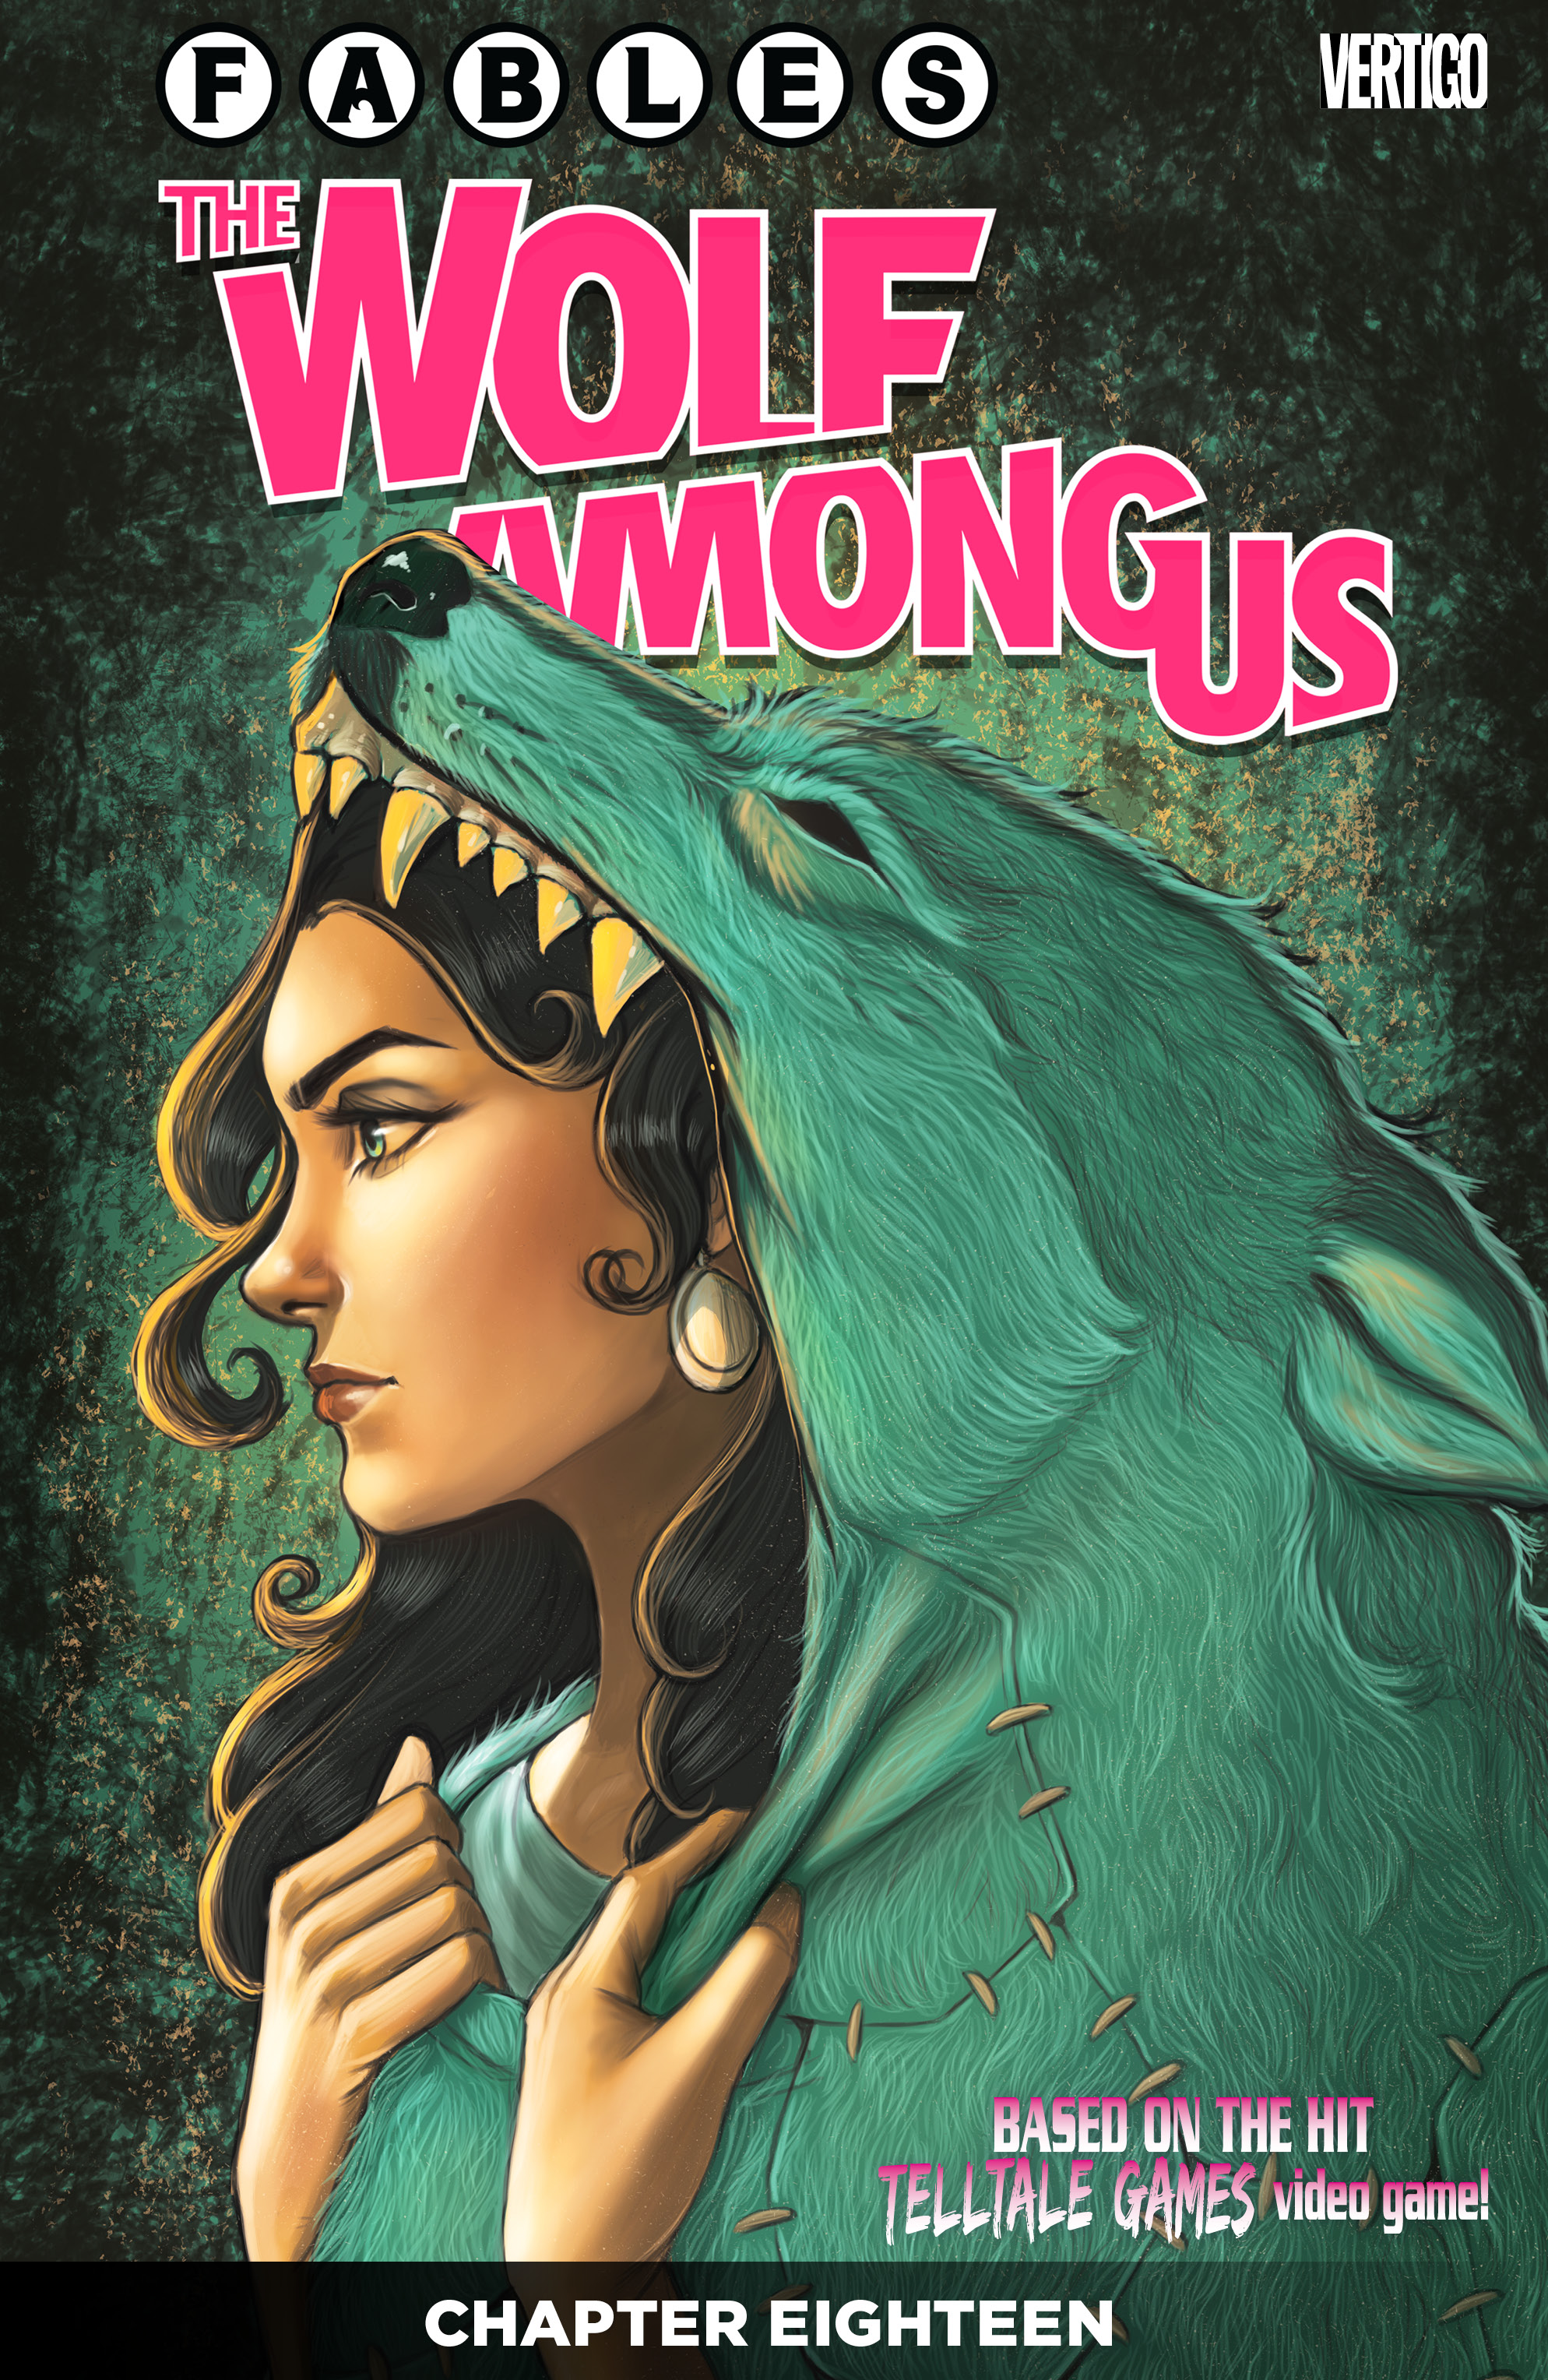 Fables: The Wolf Among Us #18 preview images